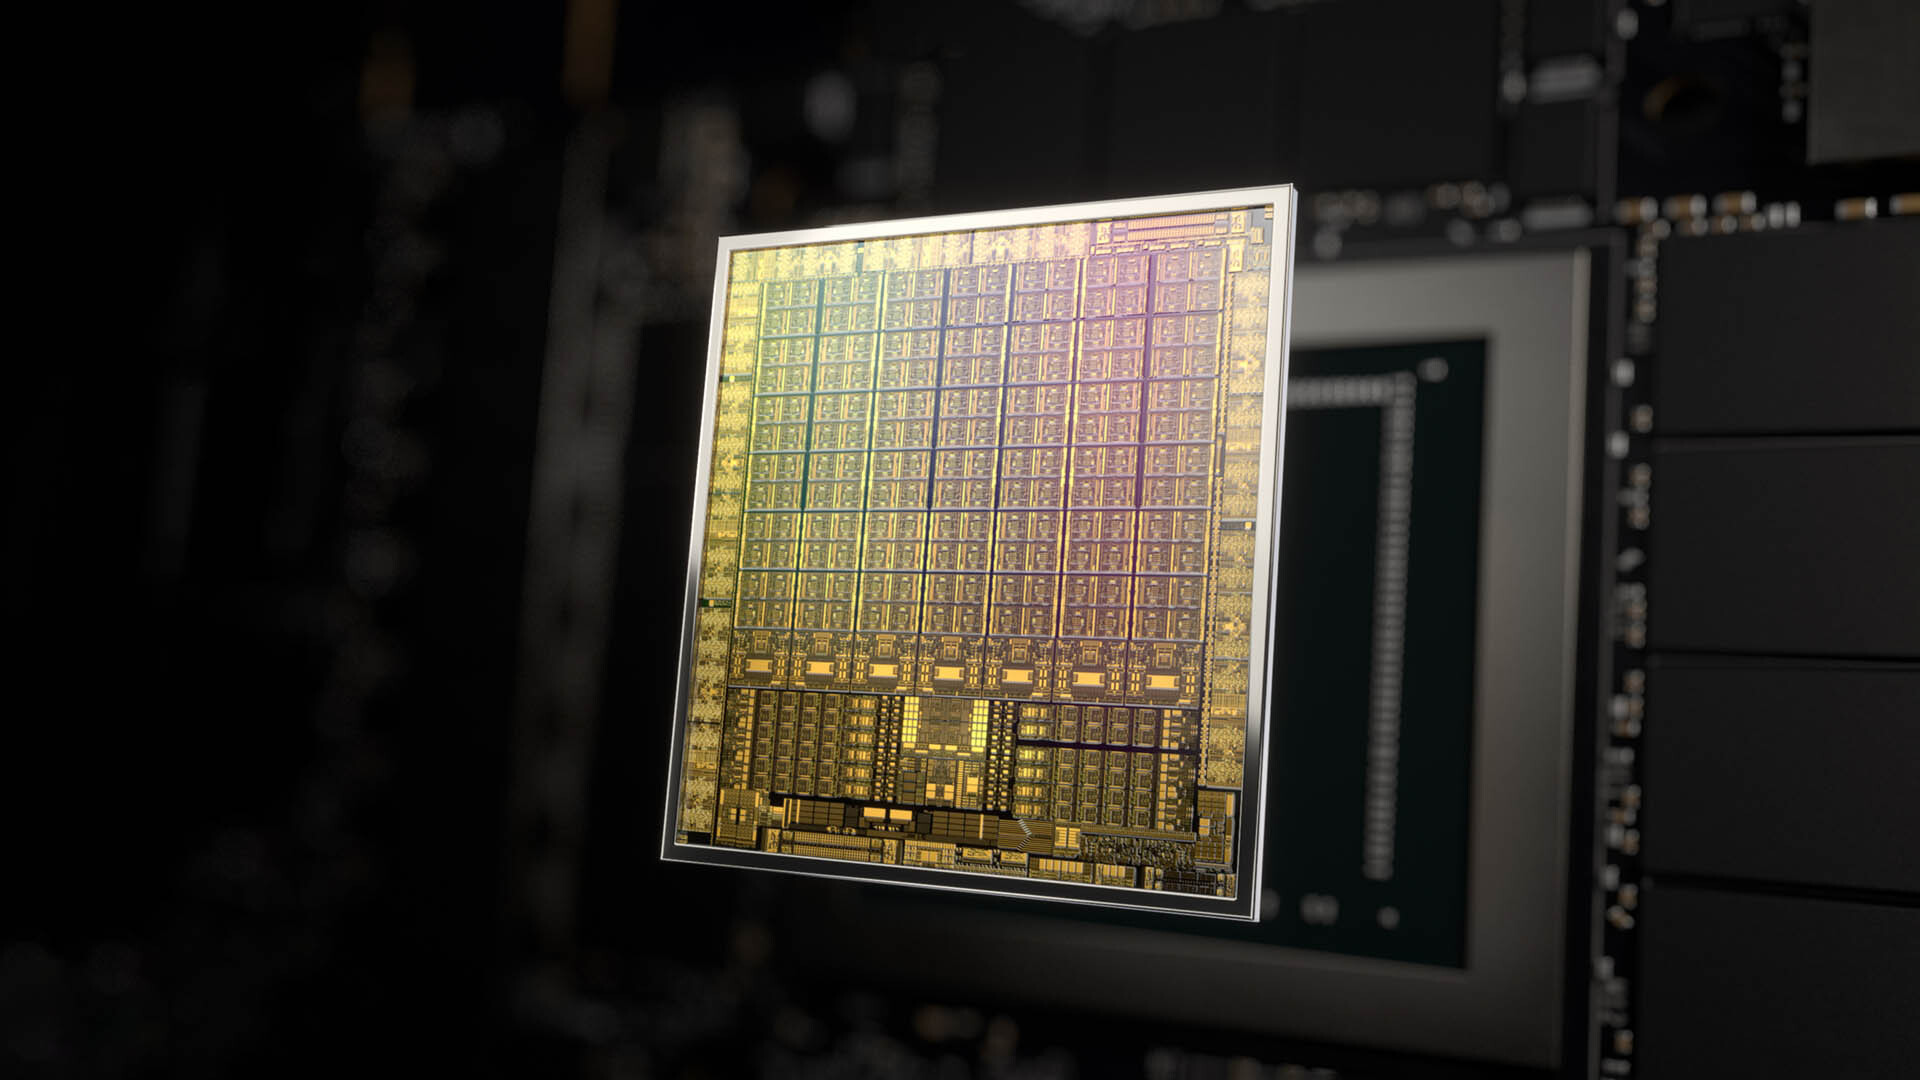  Nvidia confirms Samsung 8nm process for RTX 3090, RTX 3080, and RTX 3070 